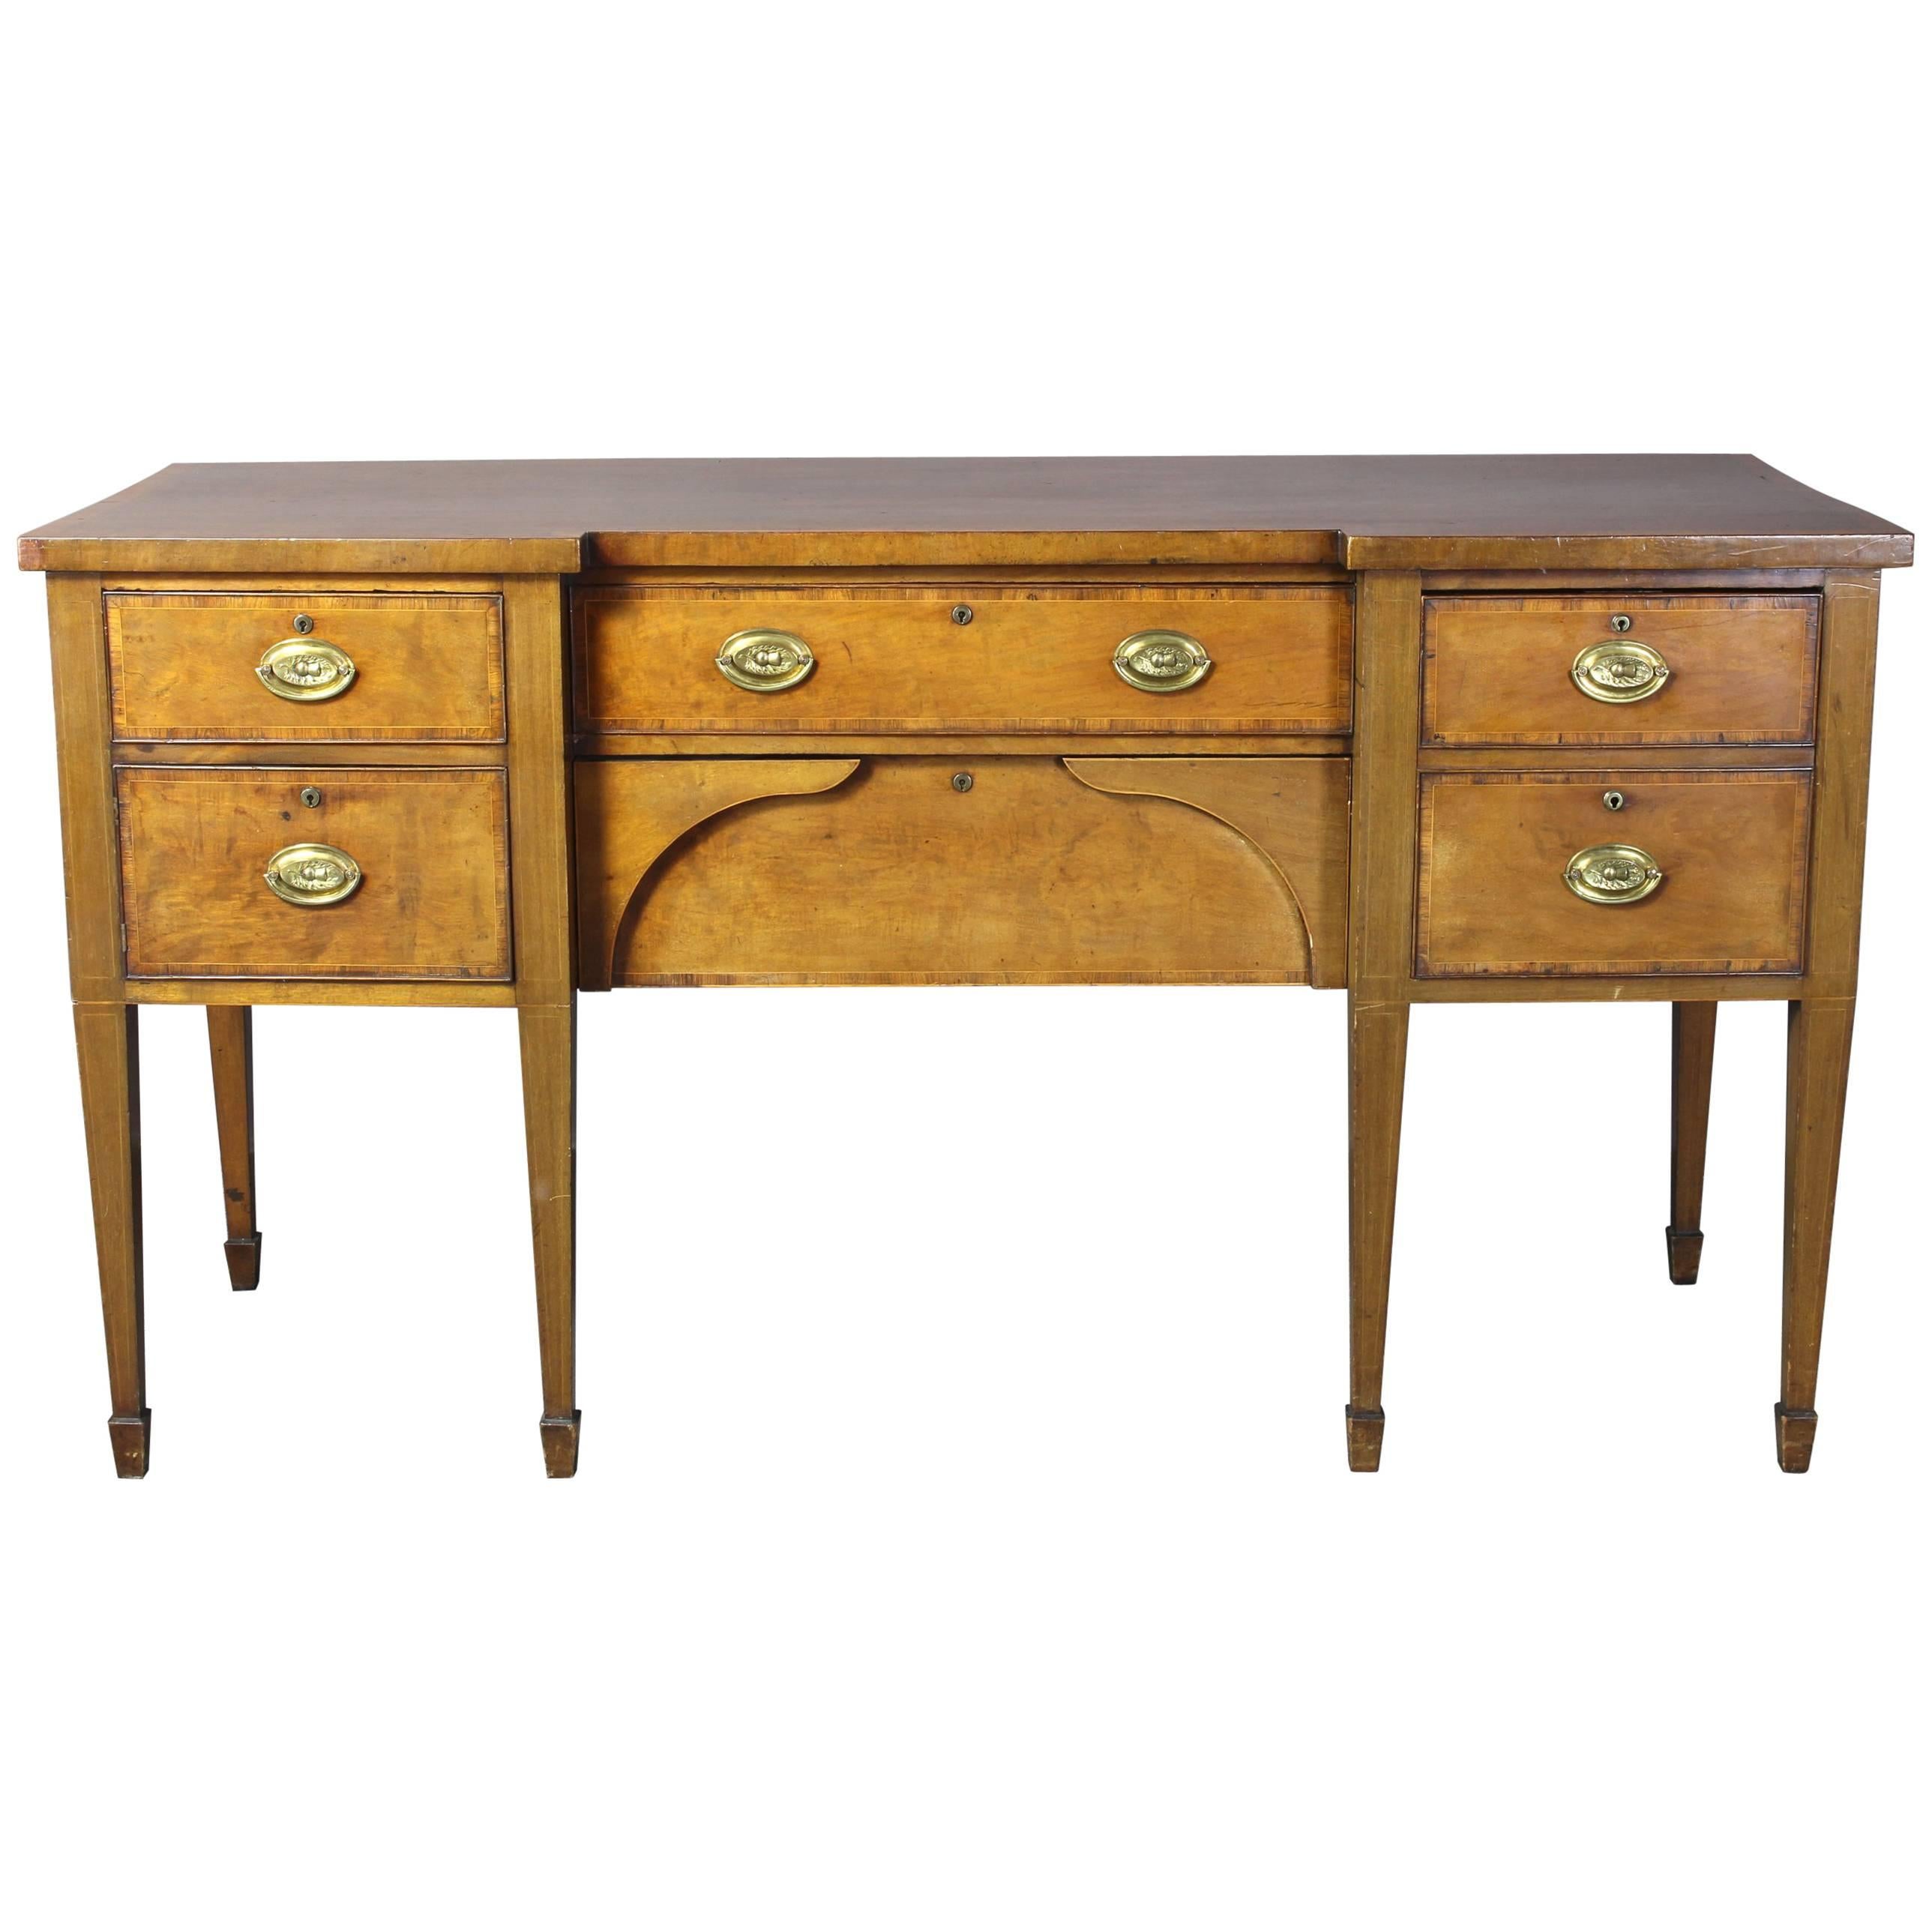 Early 19th Century Scottish Sideboard For Sale